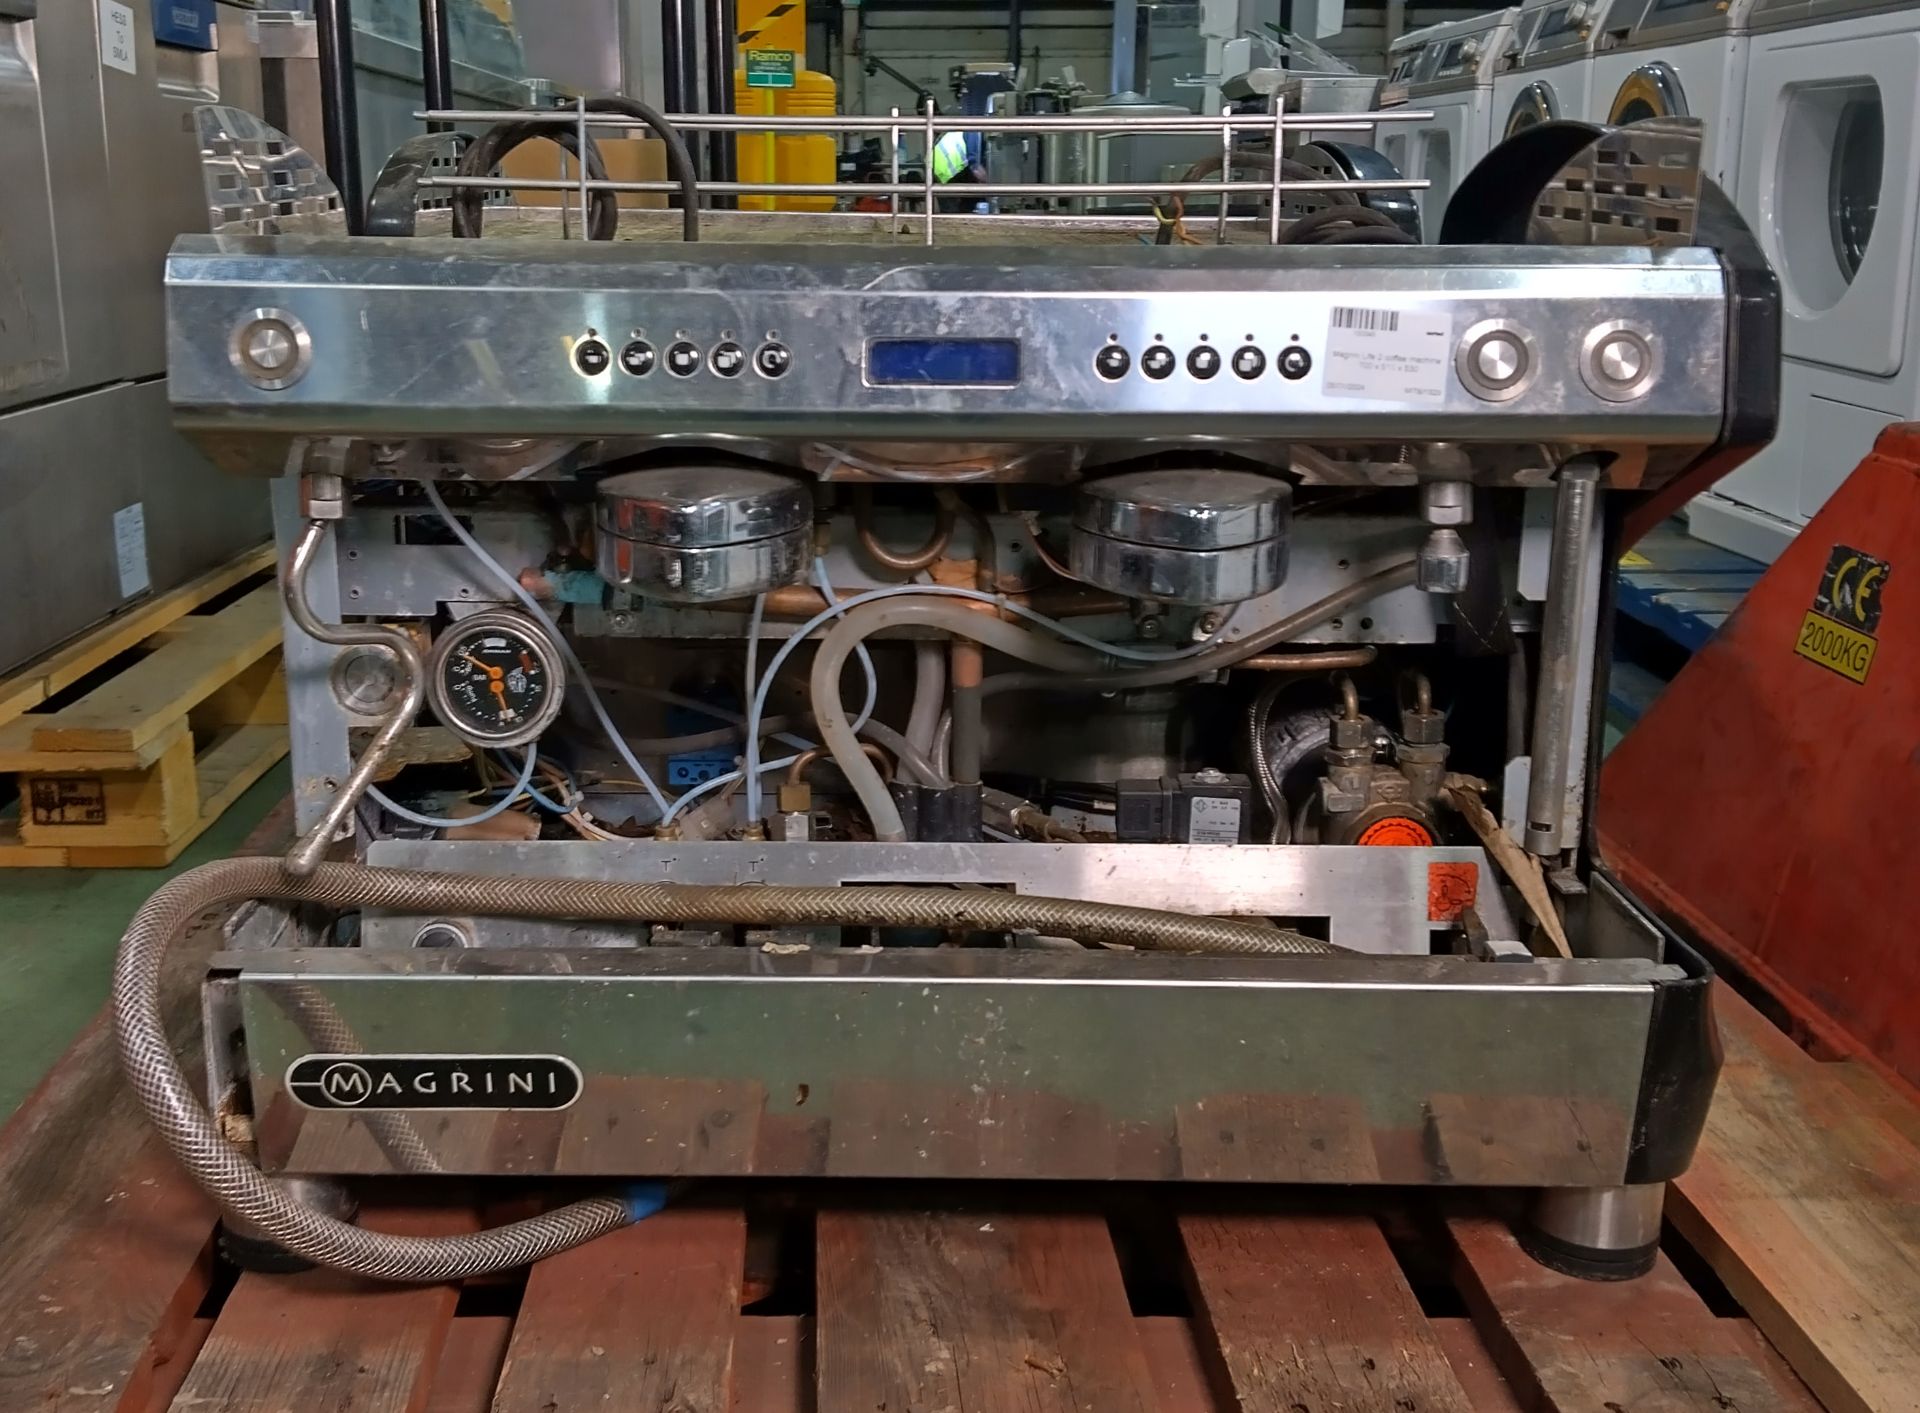 Magrini Life 2 coffee machine (missing left hand panel and drip tray) - 700 x 510 x 530mm